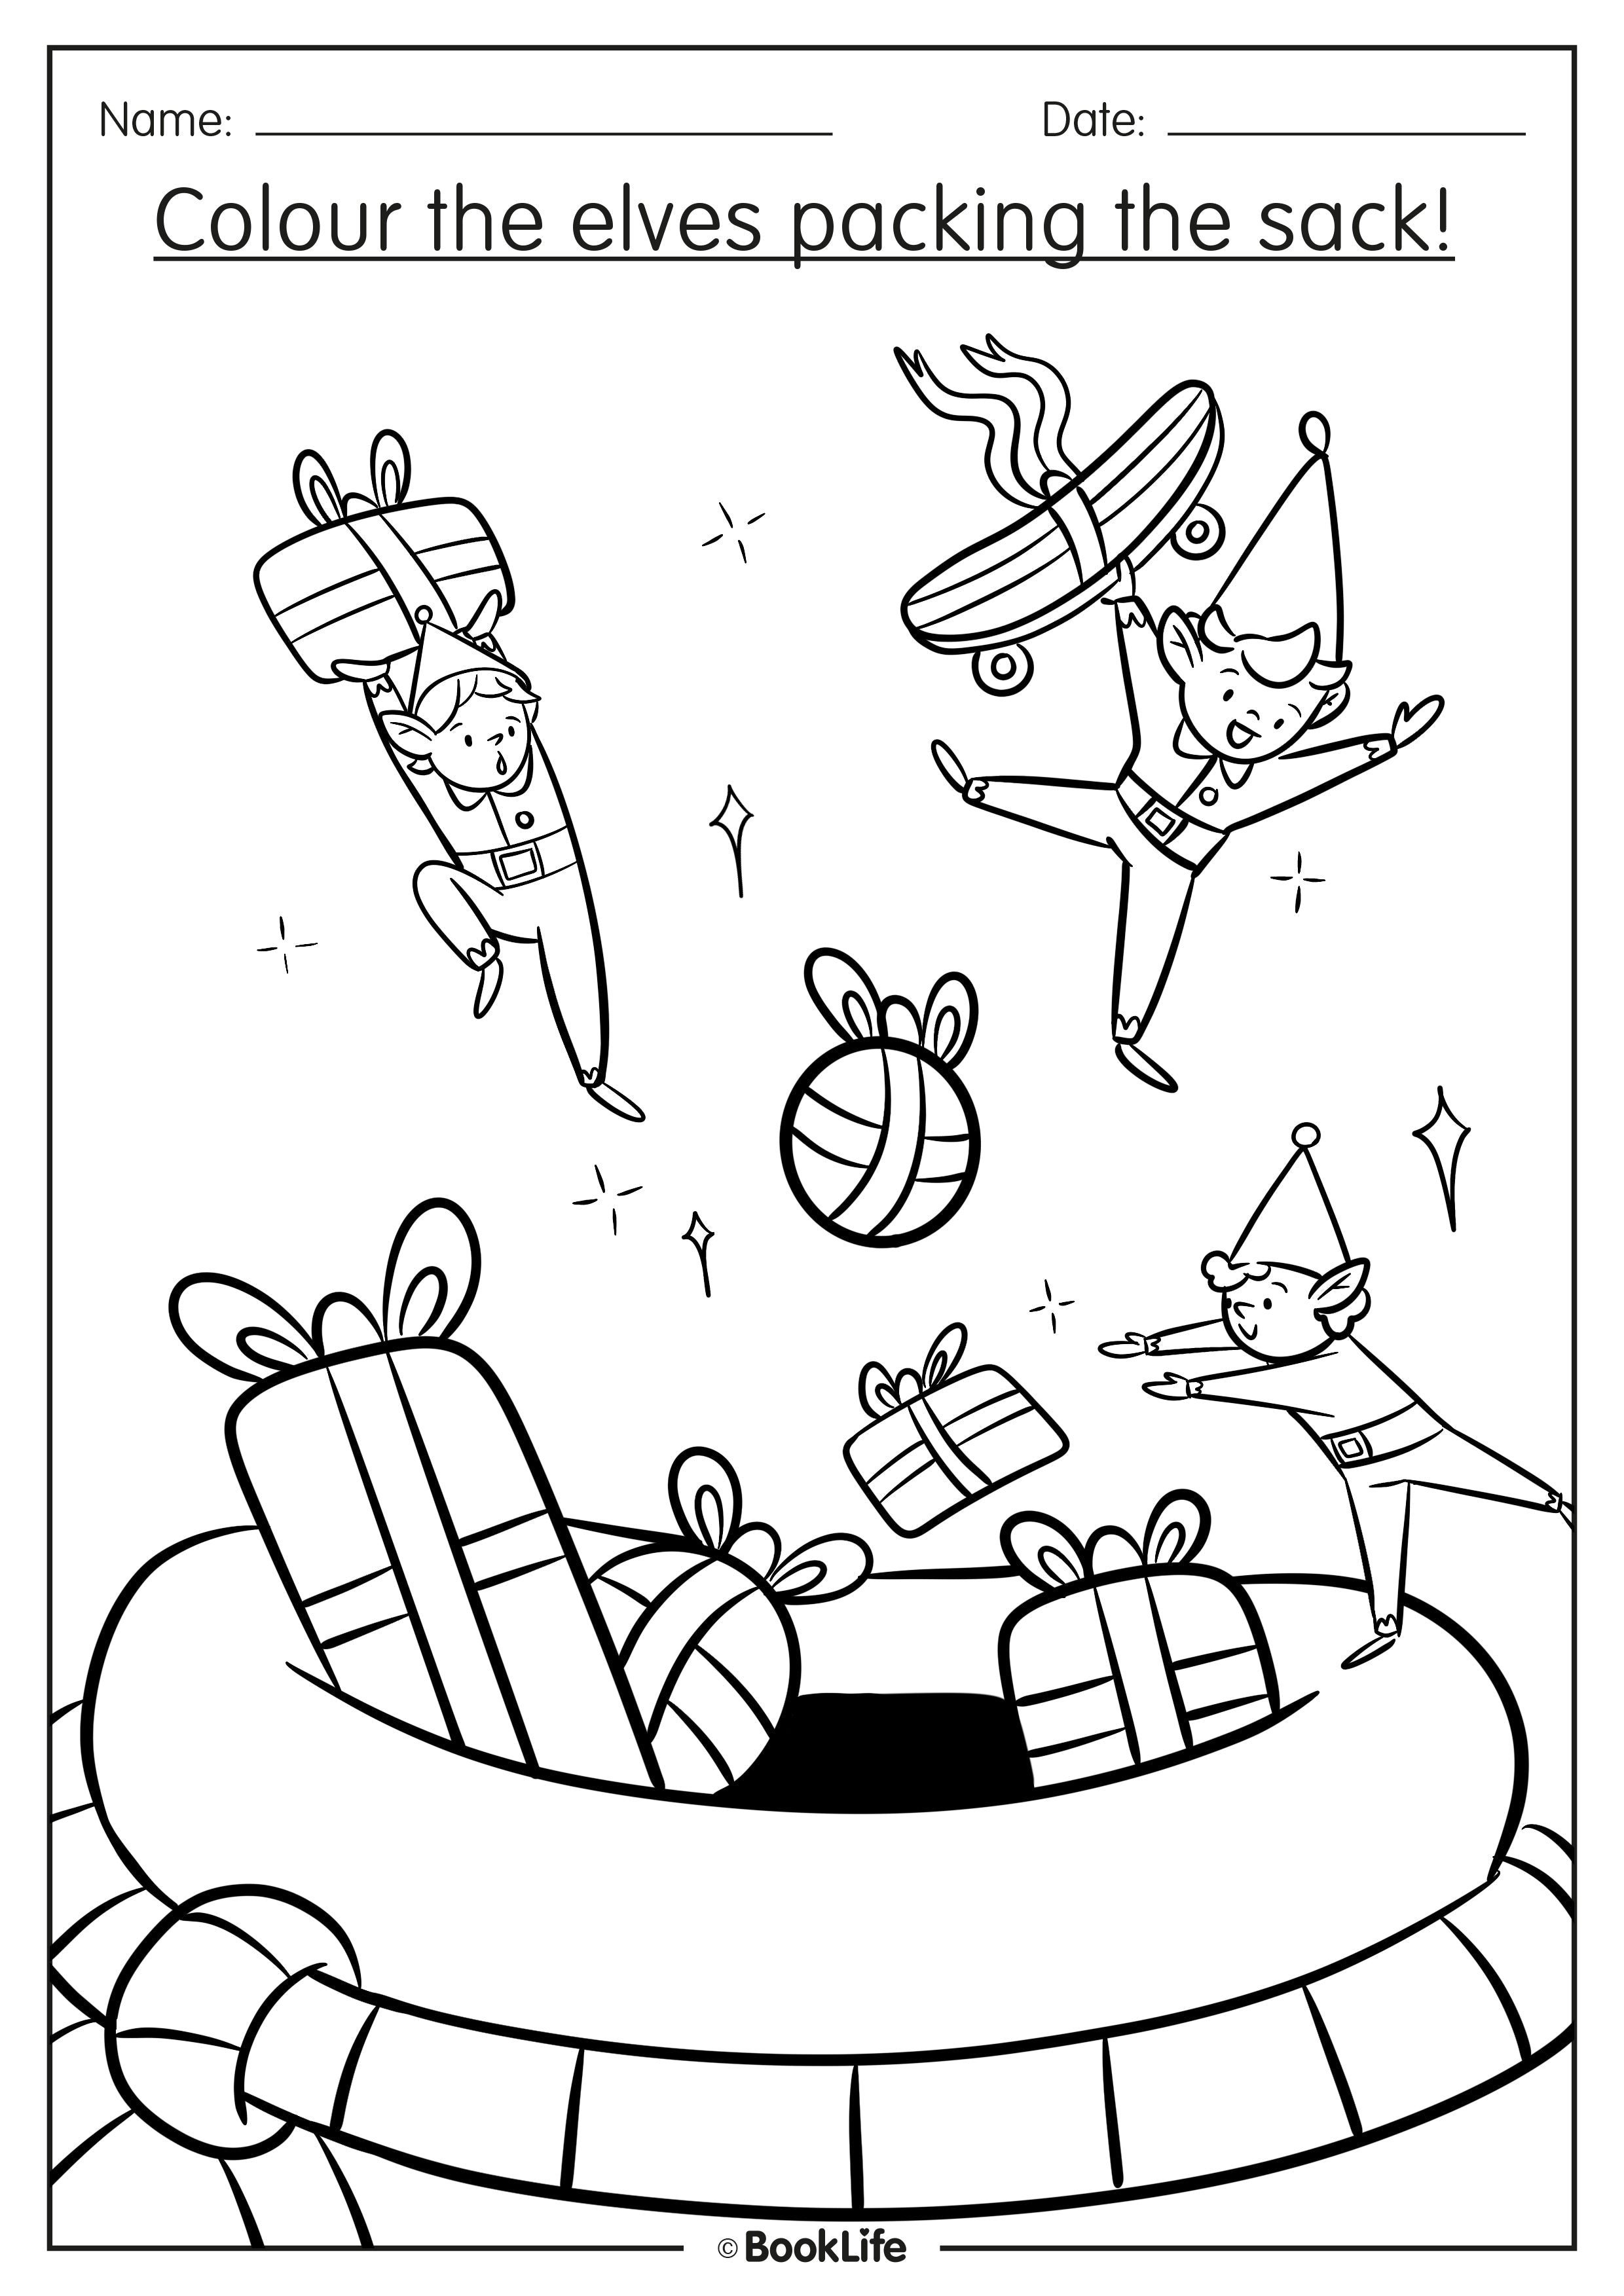 Elves Colouring In Activity Sheet